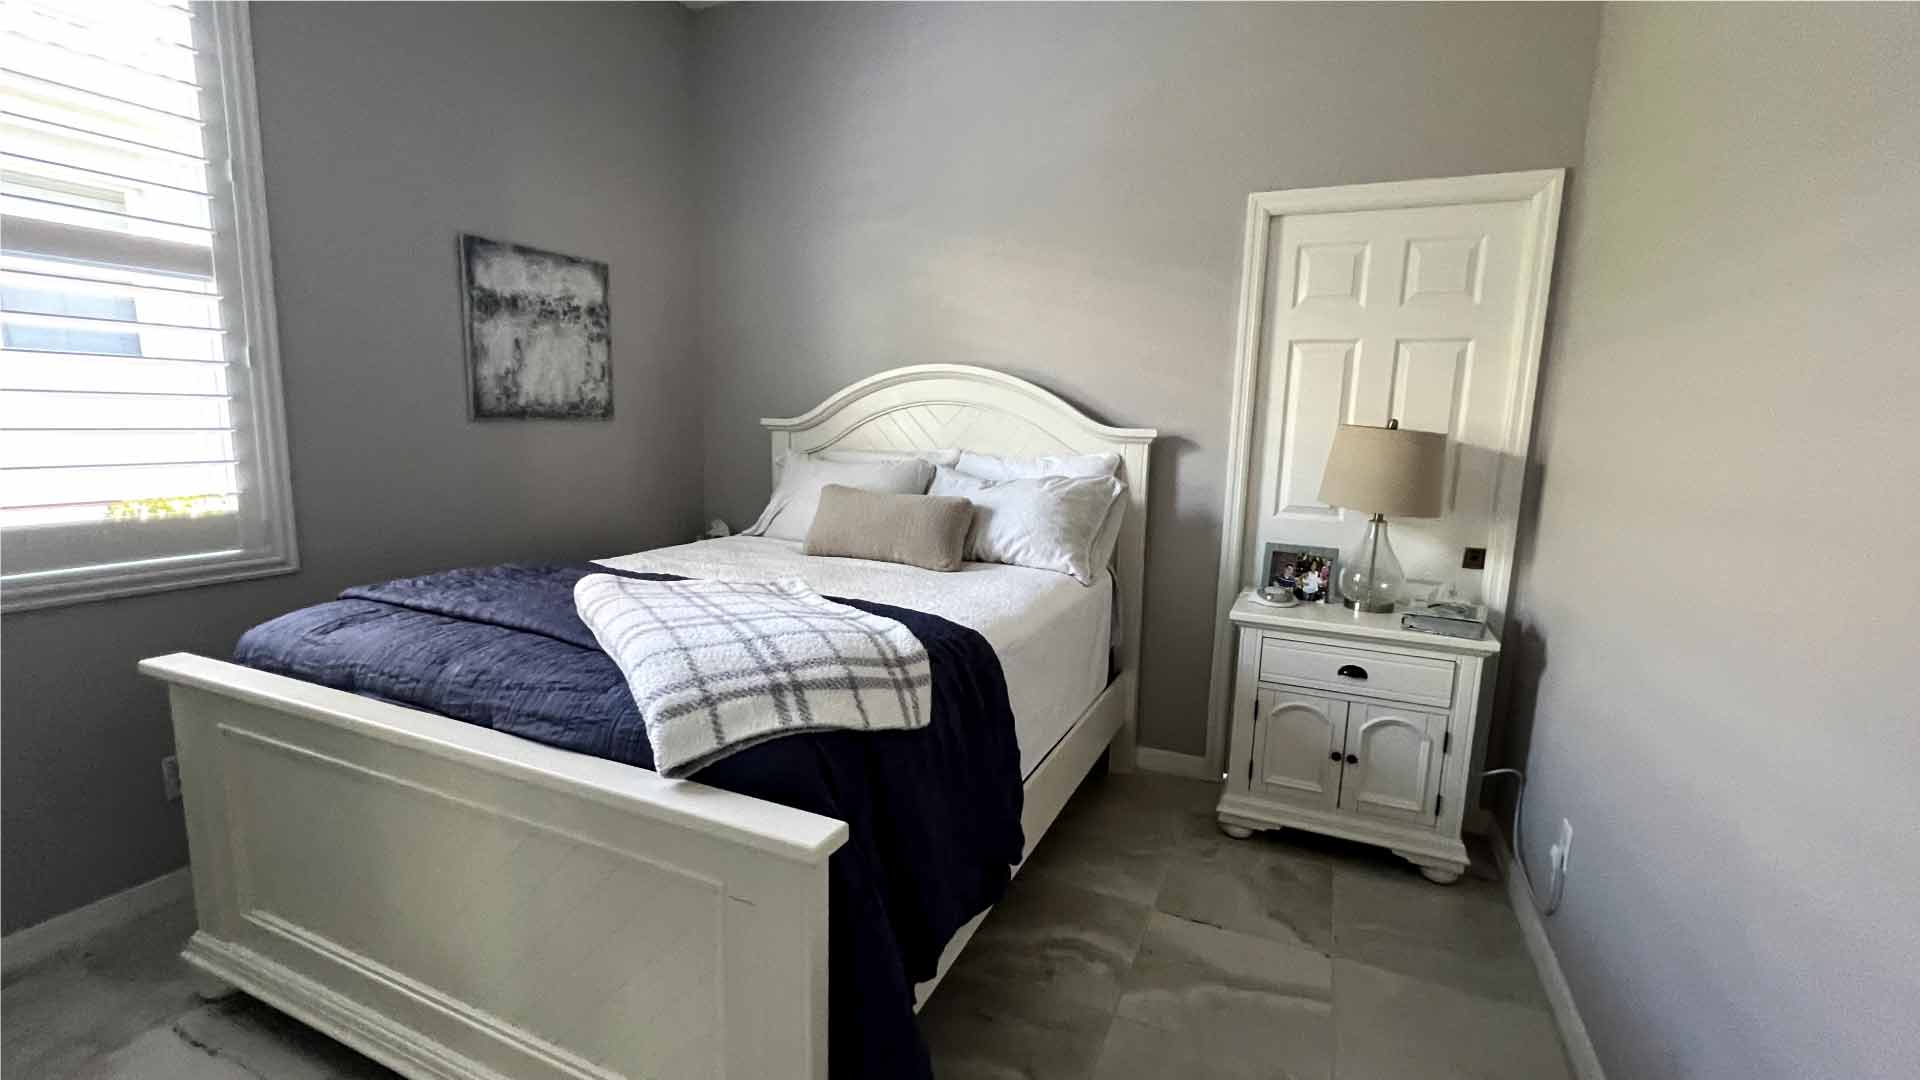 Bedroom cleaning - Regular cleaning in Cape Coral by Goldmillio - Feb 5